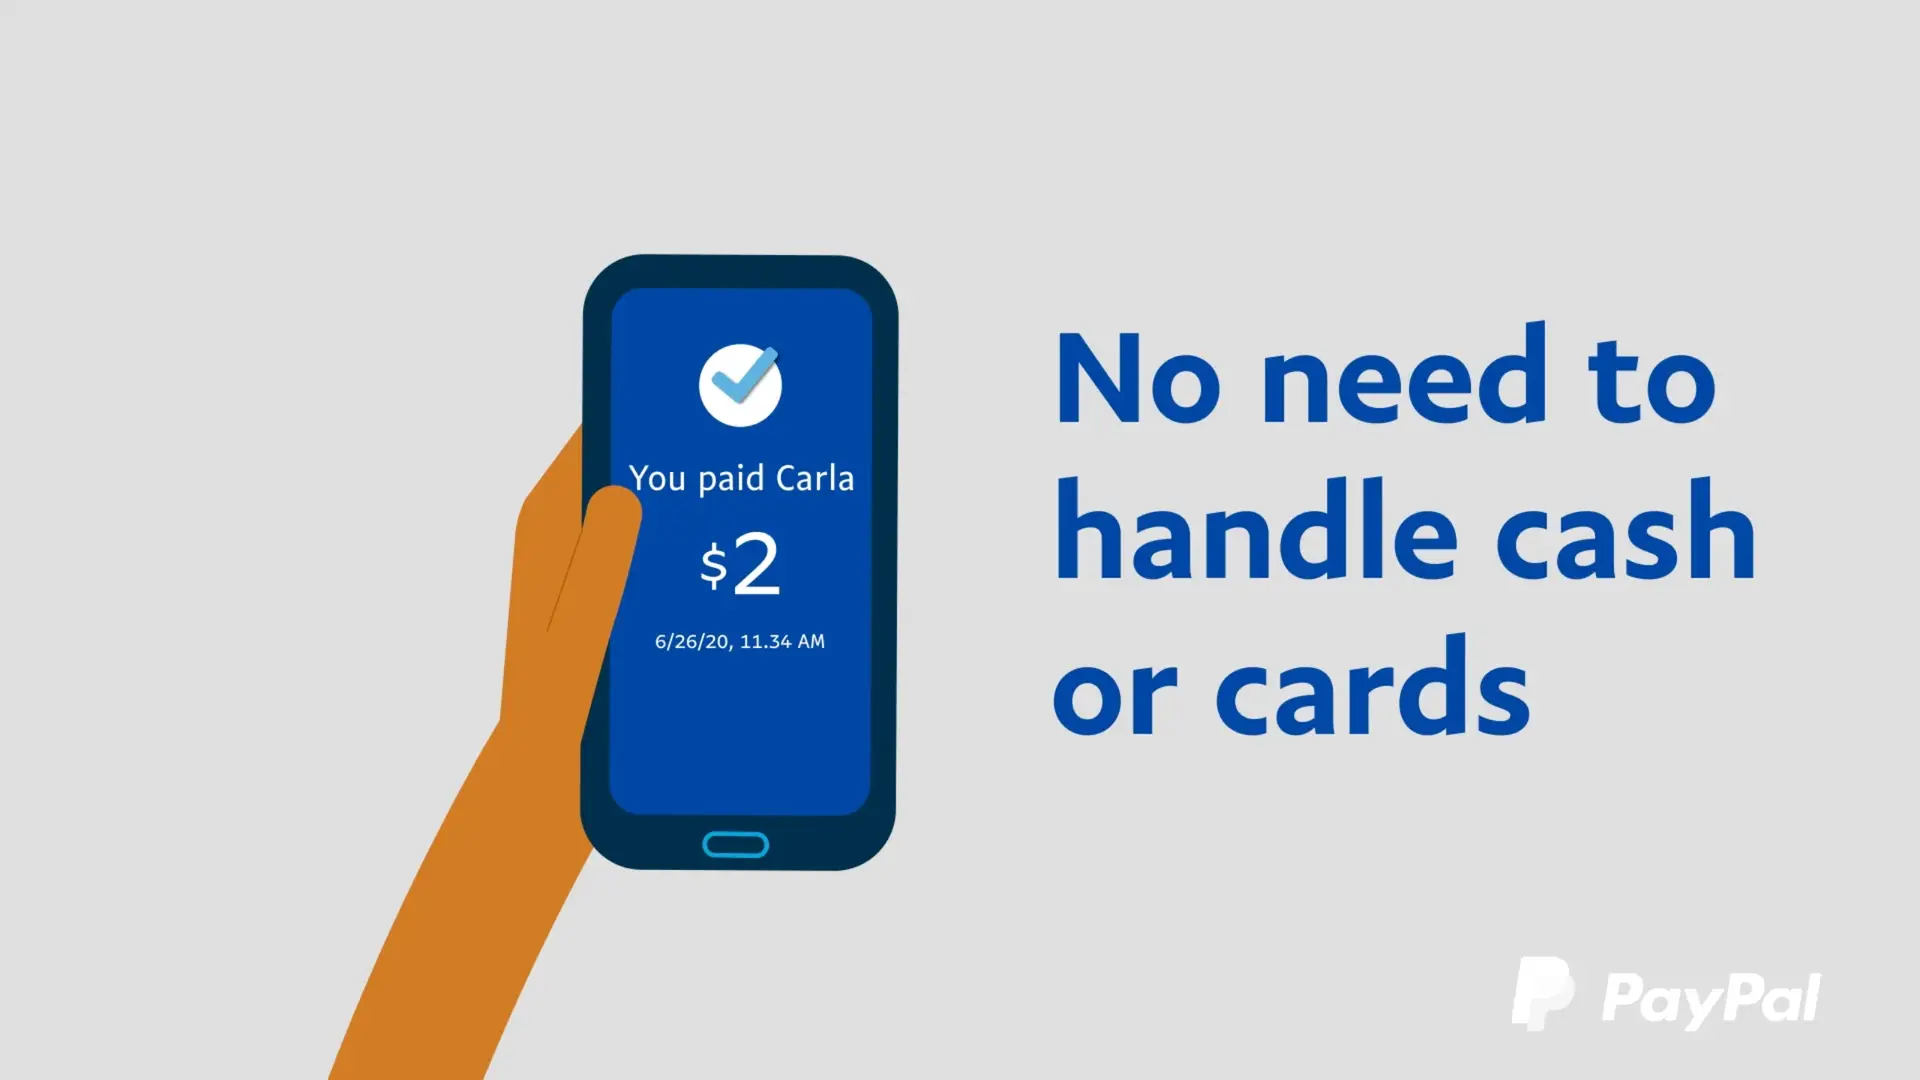 No need to handle cards with PayPal, an online payment platform.